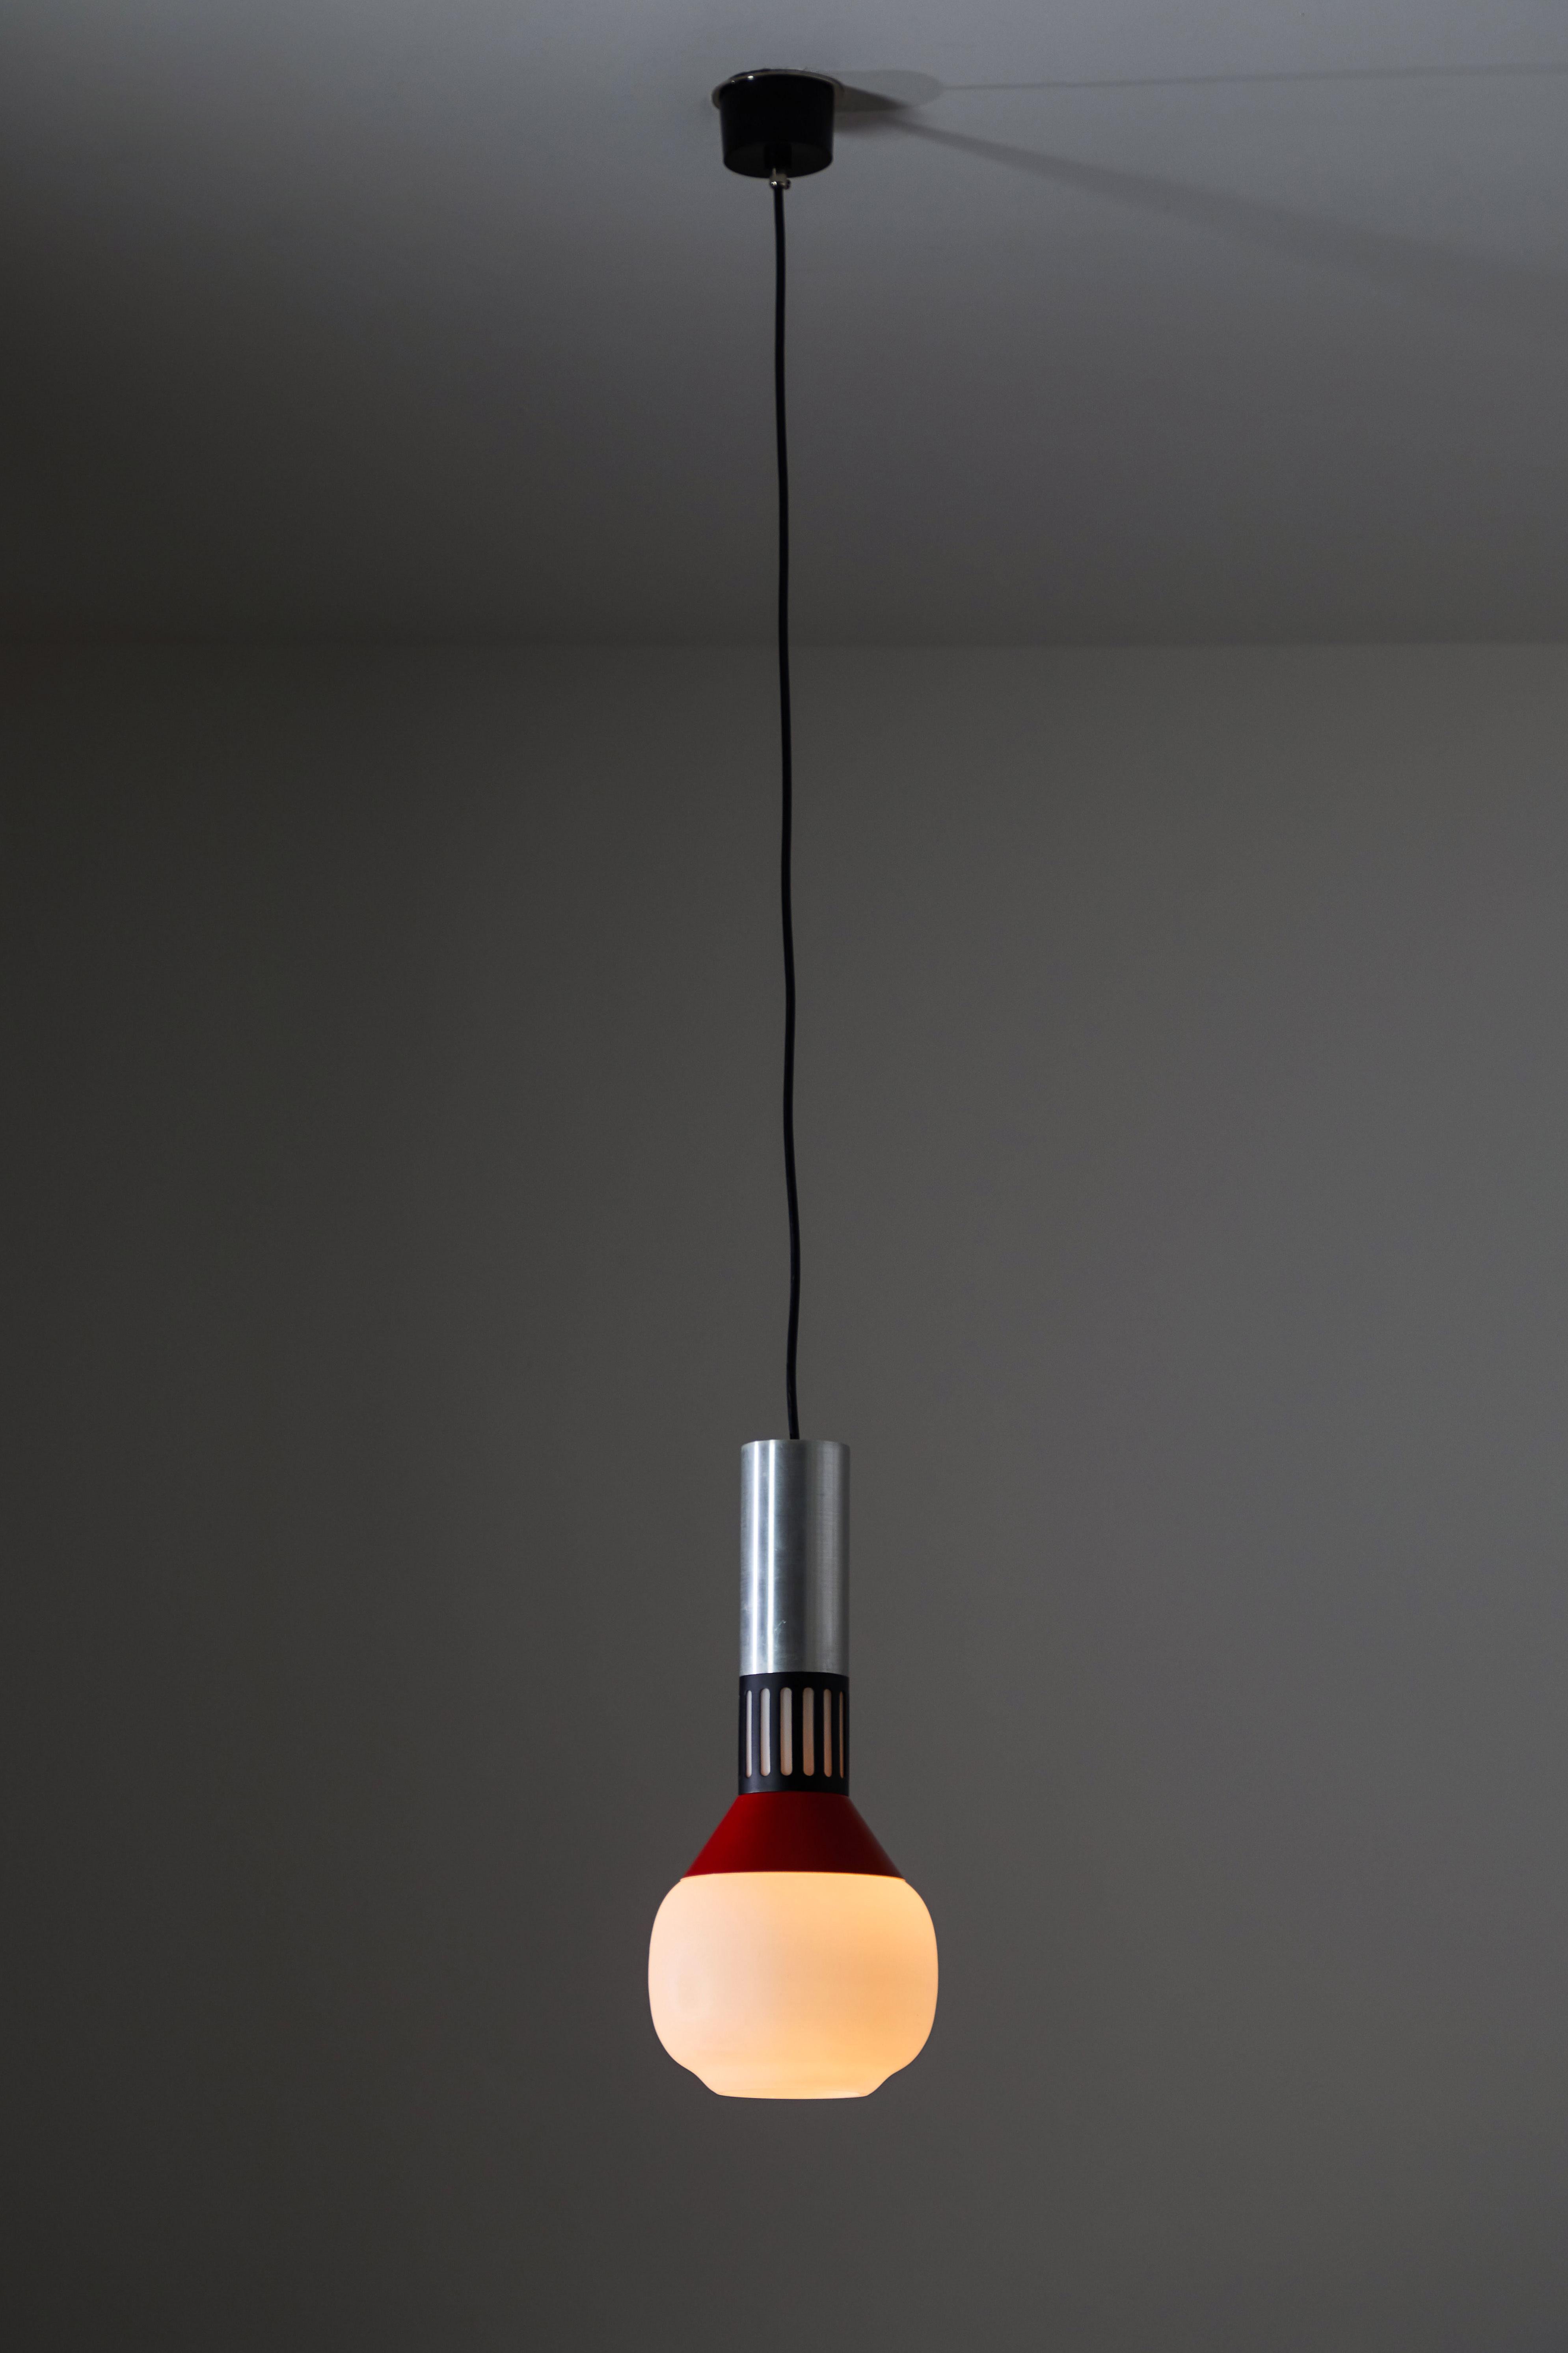 Single pendant by Stilnovo. Manufactured by Stilnovo in Italy, circa 1950s. Lacquered aluminum, acrylic and brushed satin glass diffuser. Rewired for US junction boxes. Takes one E27 75w maximum bulb. Retains original manufacturer's label. Height